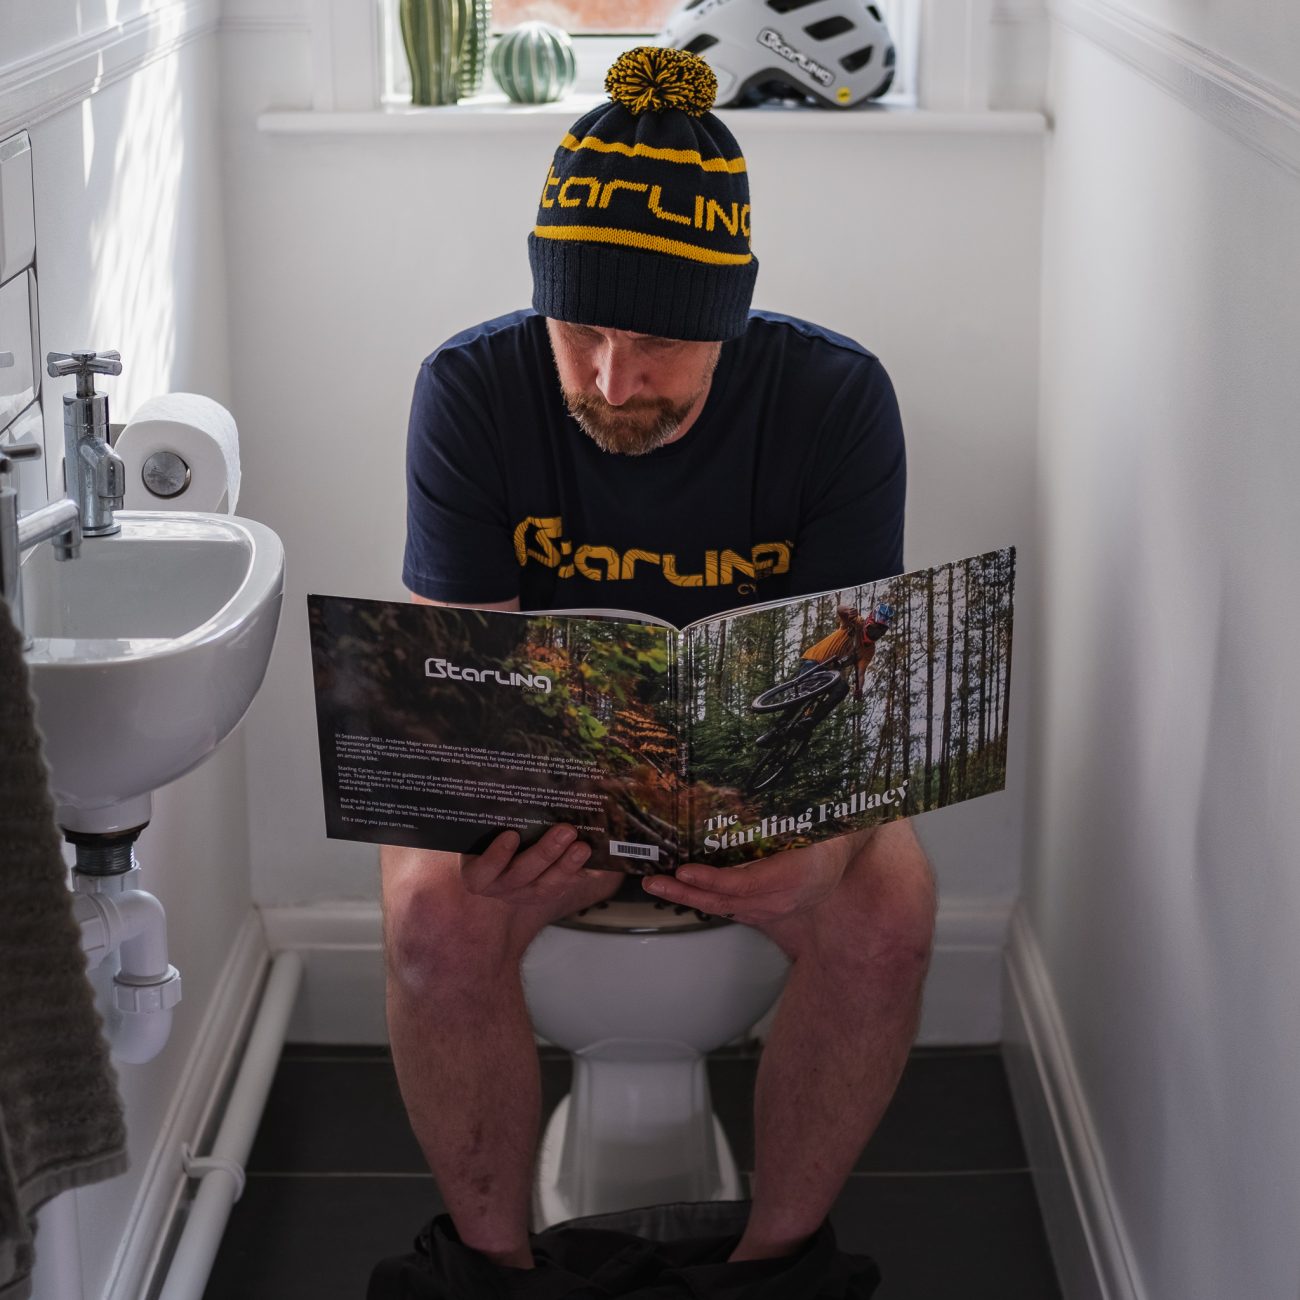 John reading Starling Fallacy on the toilet